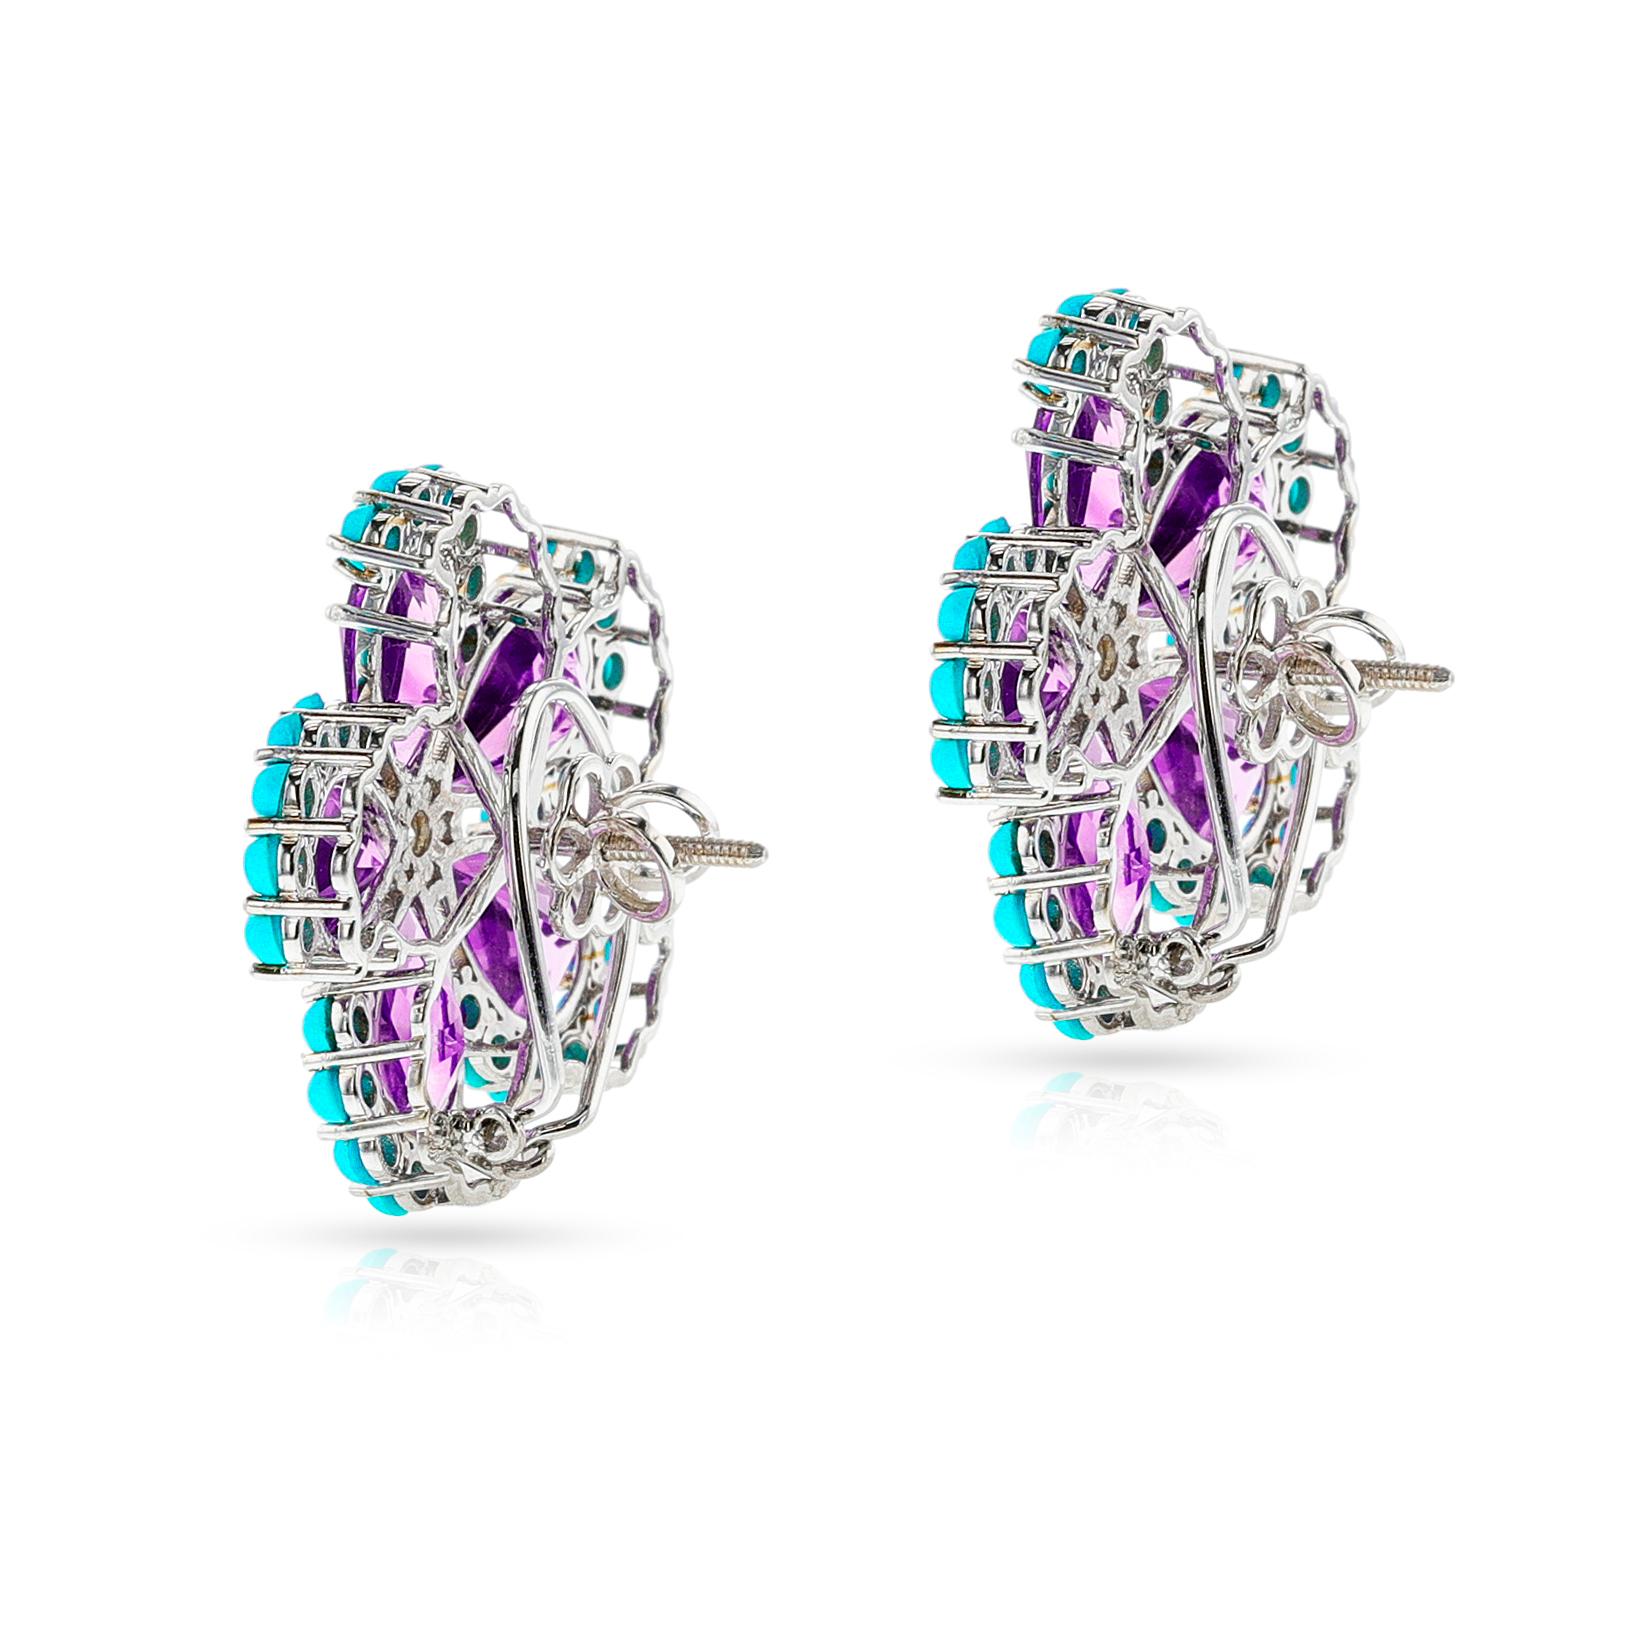 Amethyst, Turquoise Cabochon, and Diamond Floral Earrings, 18k In Excellent Condition For Sale In New York, NY